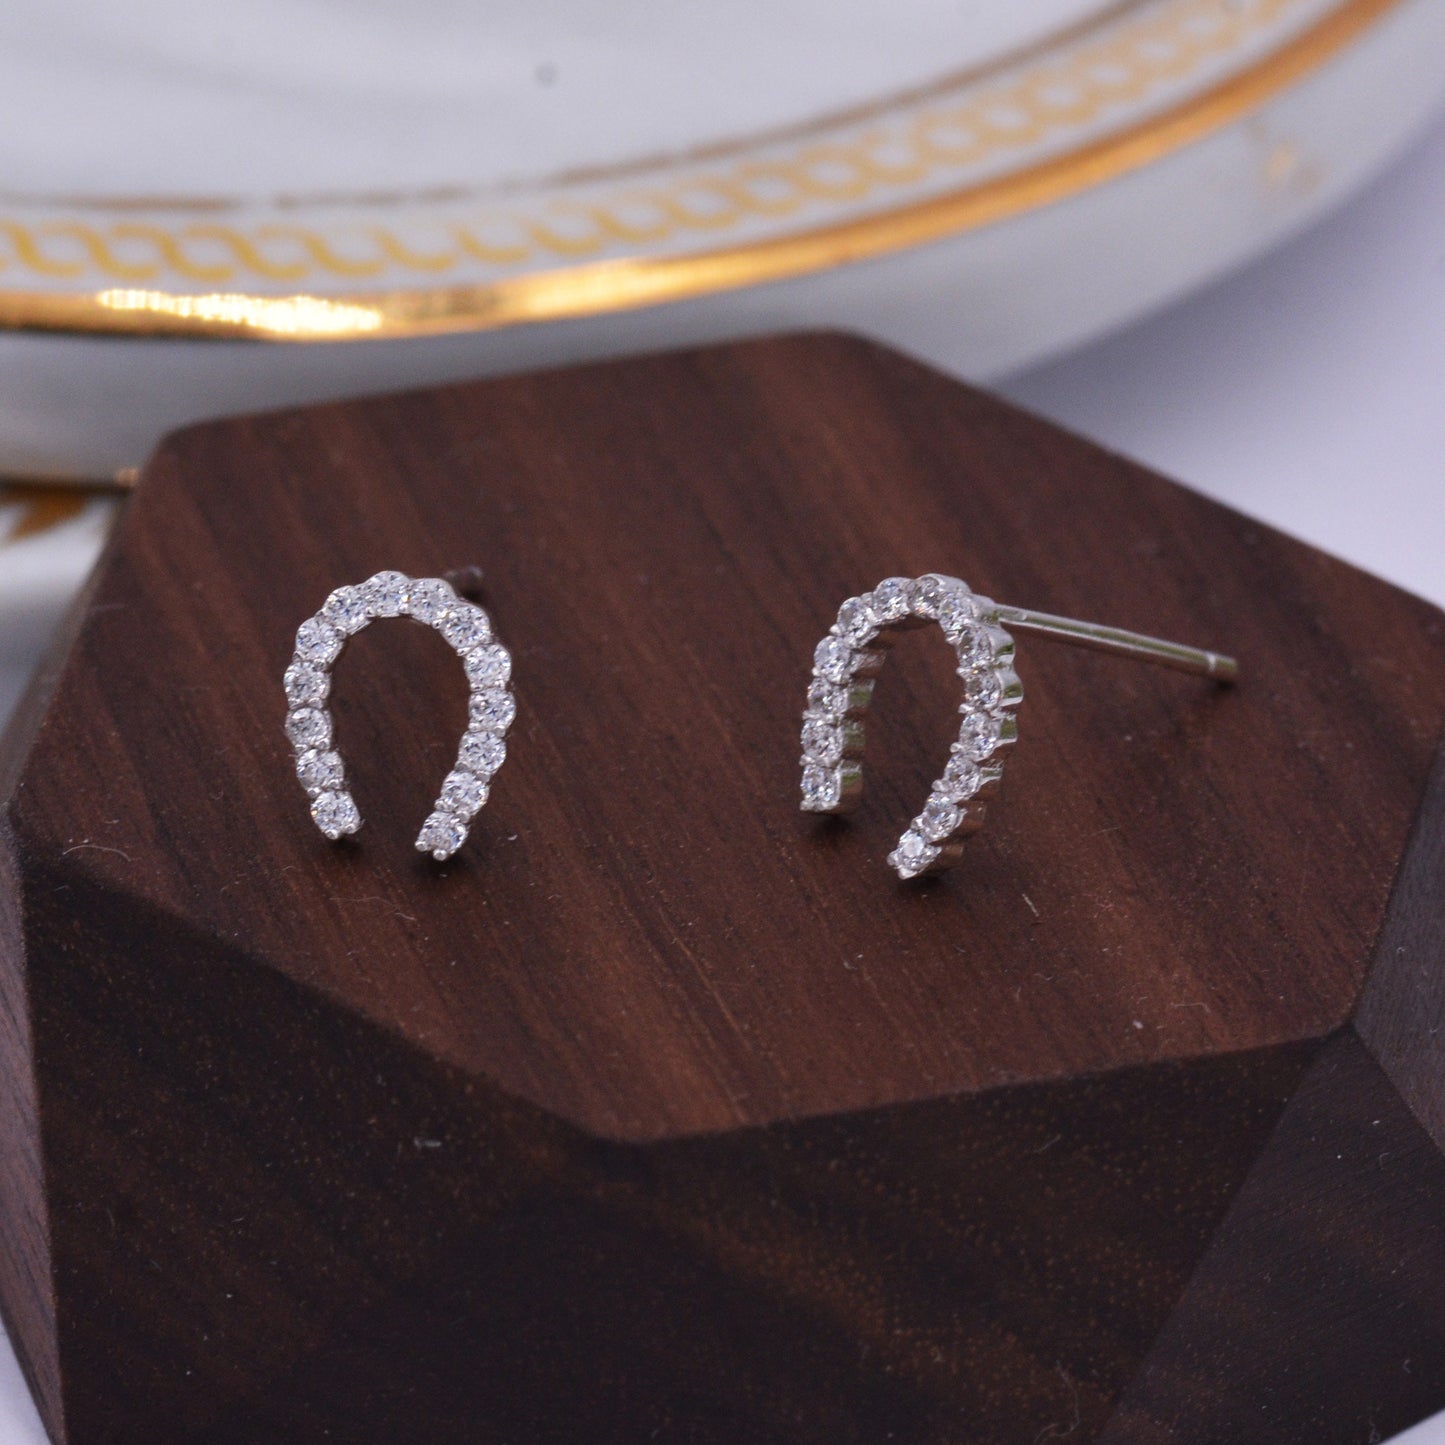 Sterling Silver Horseshoe Stud Earrings with Sparkling CZ Crystals, Fun and Quirky, Jewellery for Good Luck K35